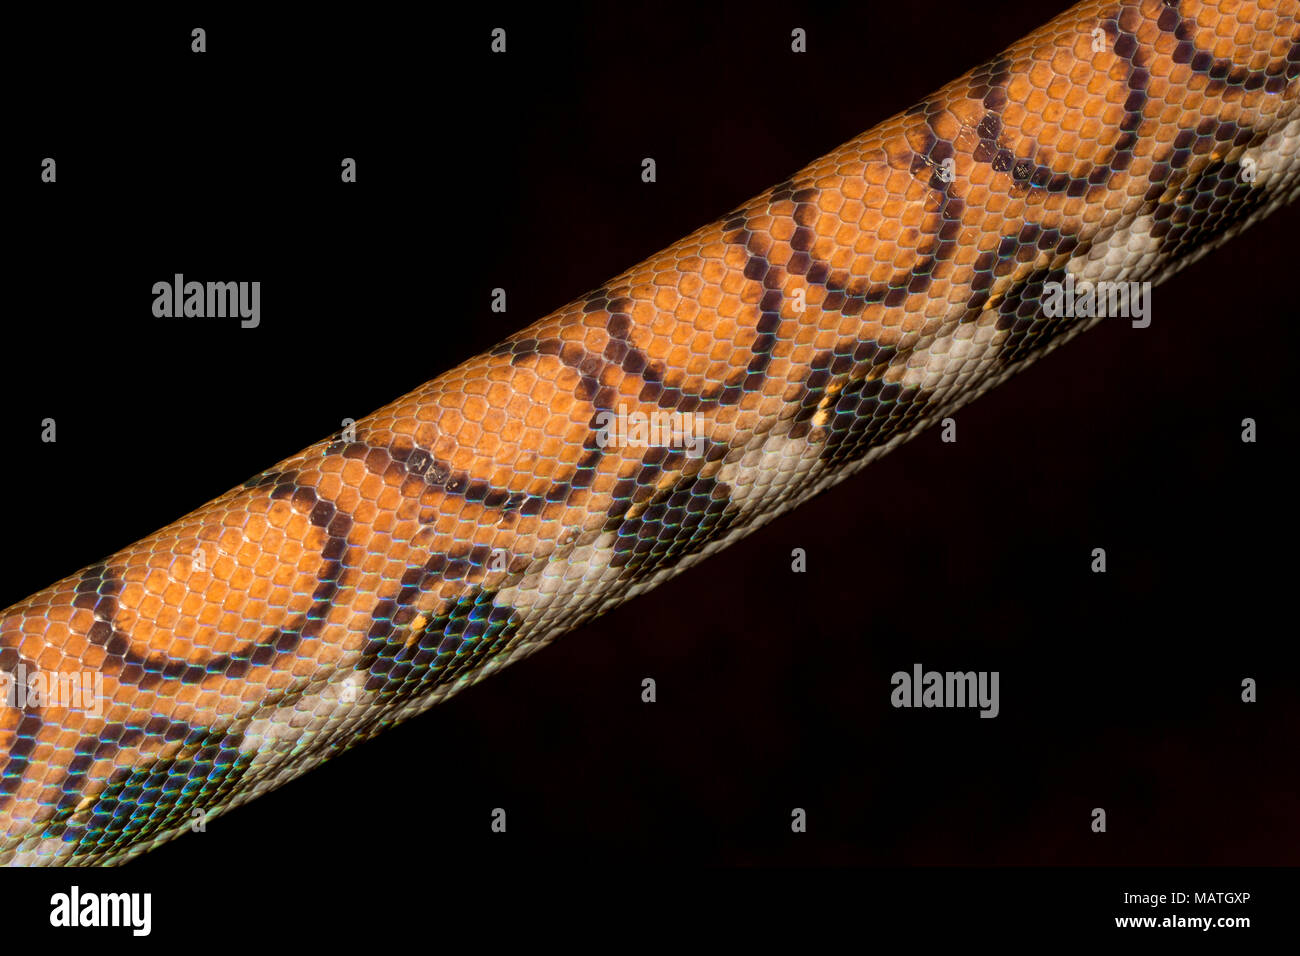 A Rainbow boa constrictor, Epicrates cenchria, in the jungle of Suriname near Bakhuis, South America. Picture shows scale pattern and colouration Stock Photo